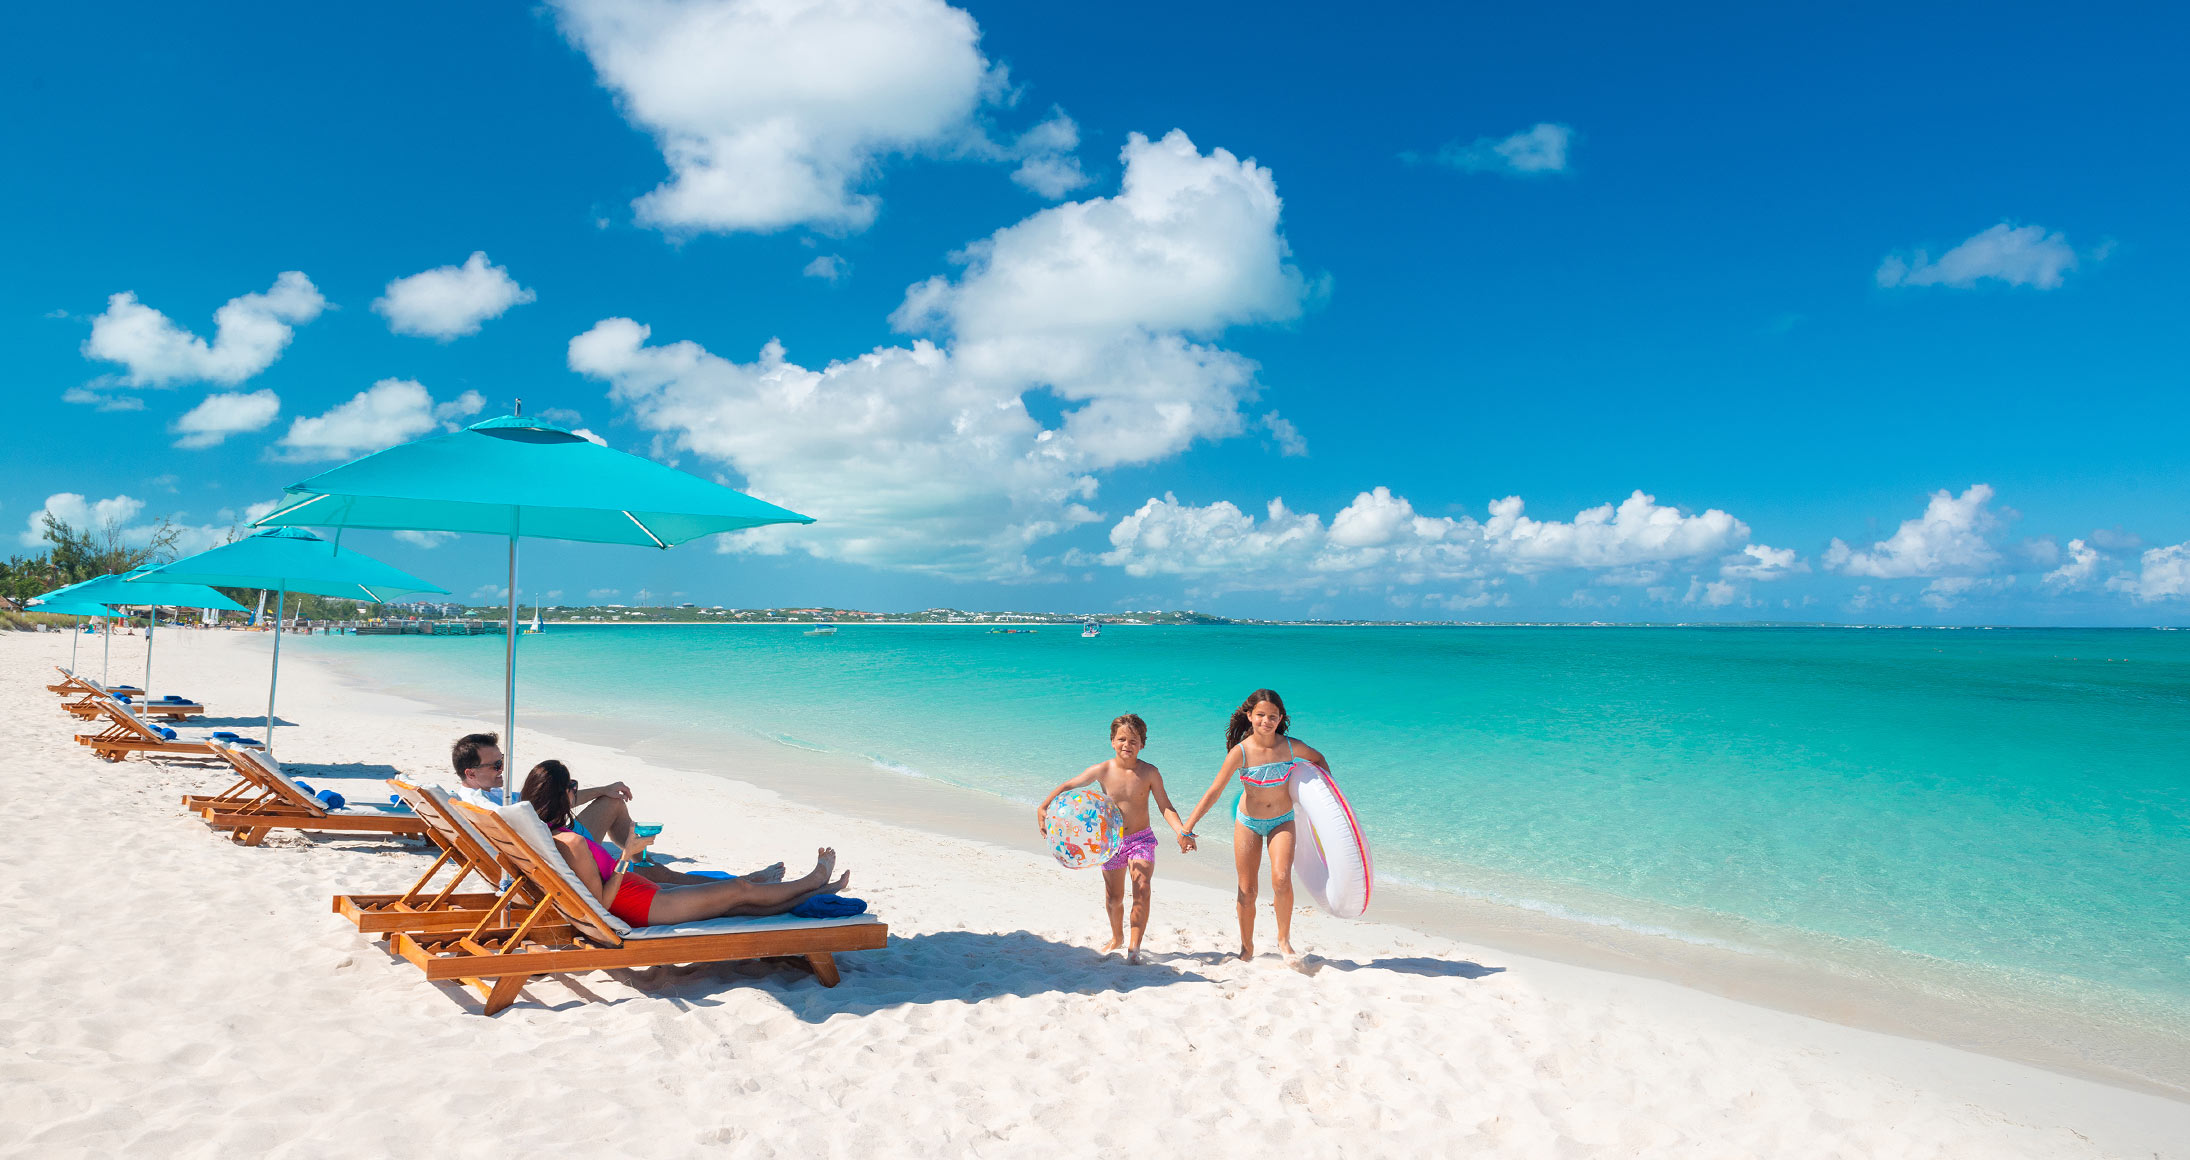 Beaches® Turks And Caicos All Inclusive Resorts [official]